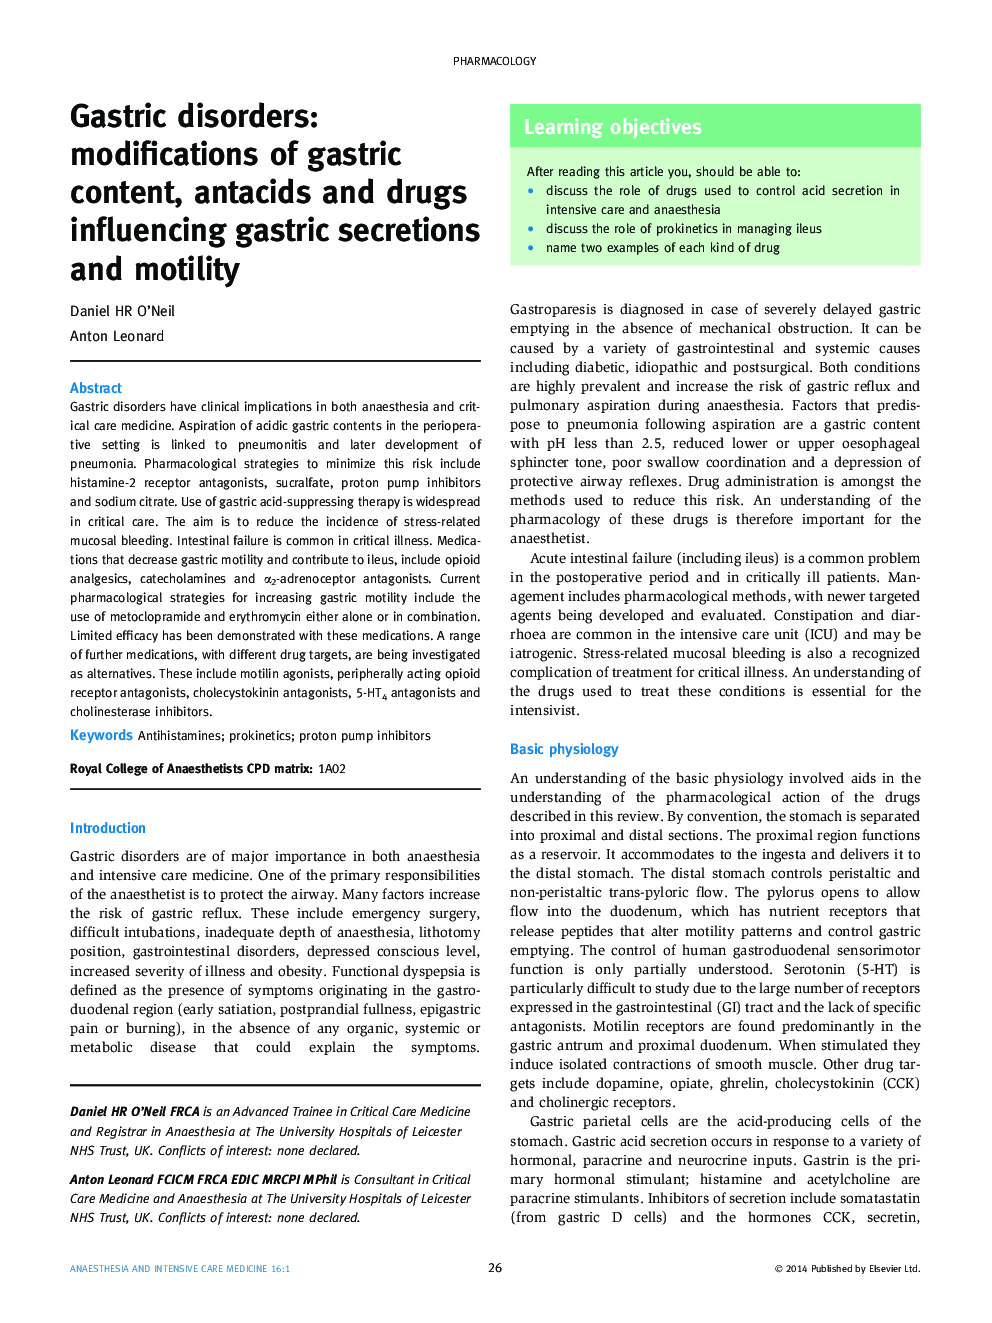 Gastric disorders: modifications of gastric content, antacids and drugs influencing gastric secretions and motility